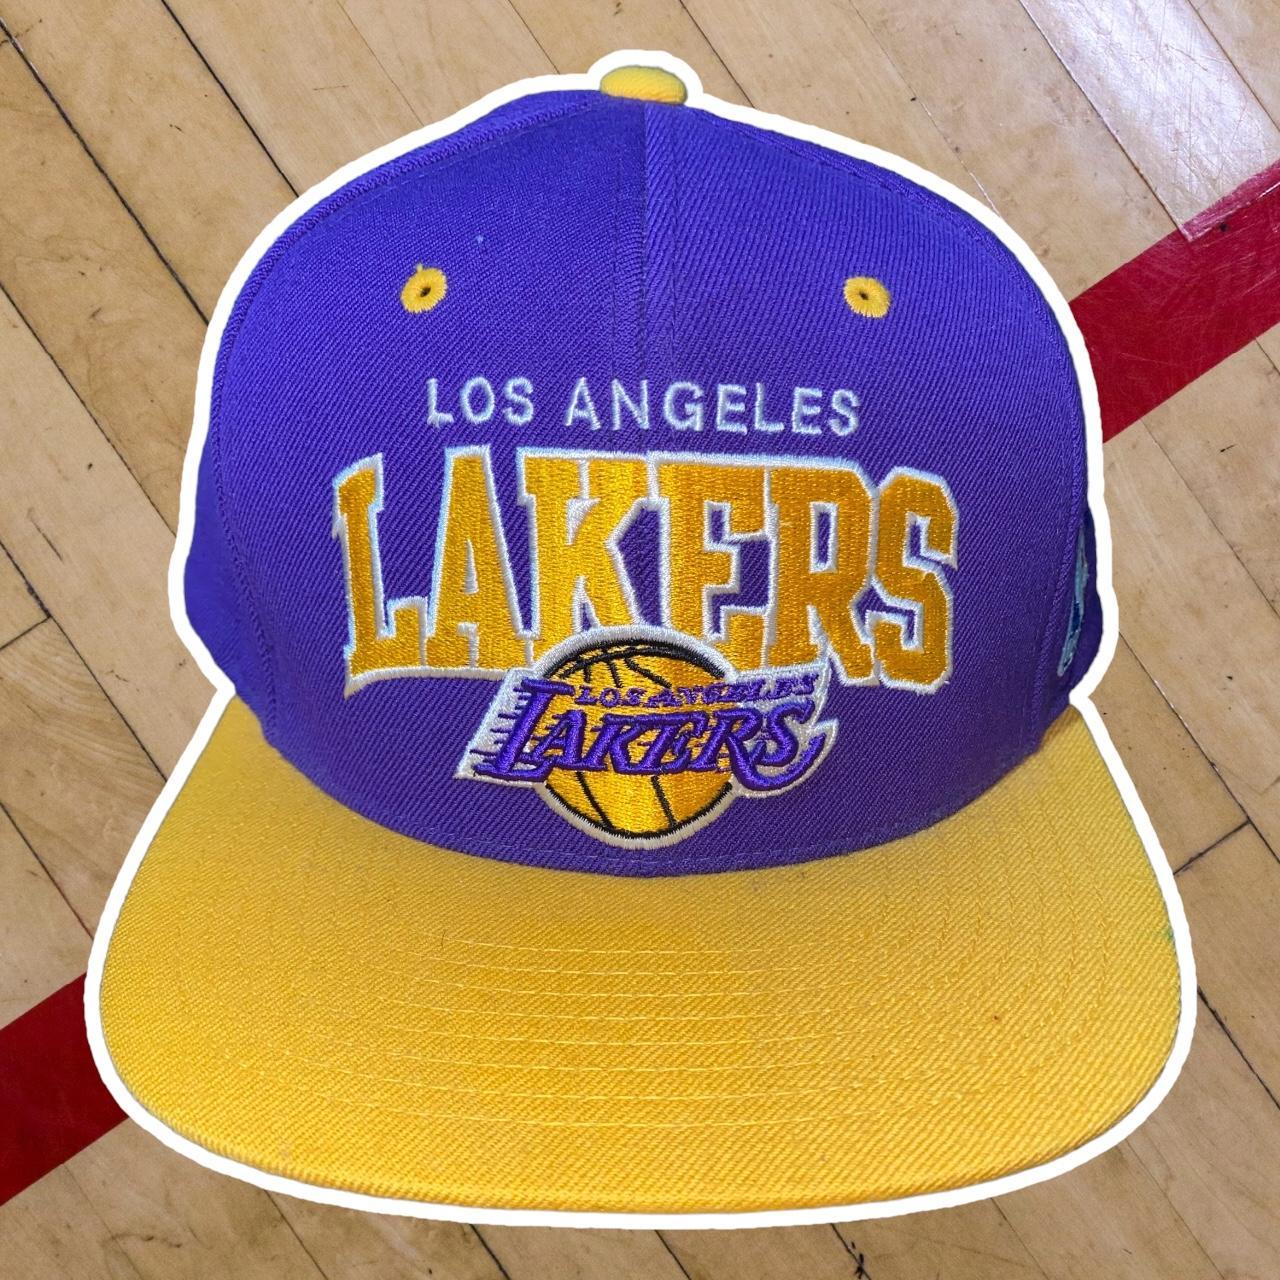 Lakers Mitchell & Ness Dad hat brand new #lakers - Depop